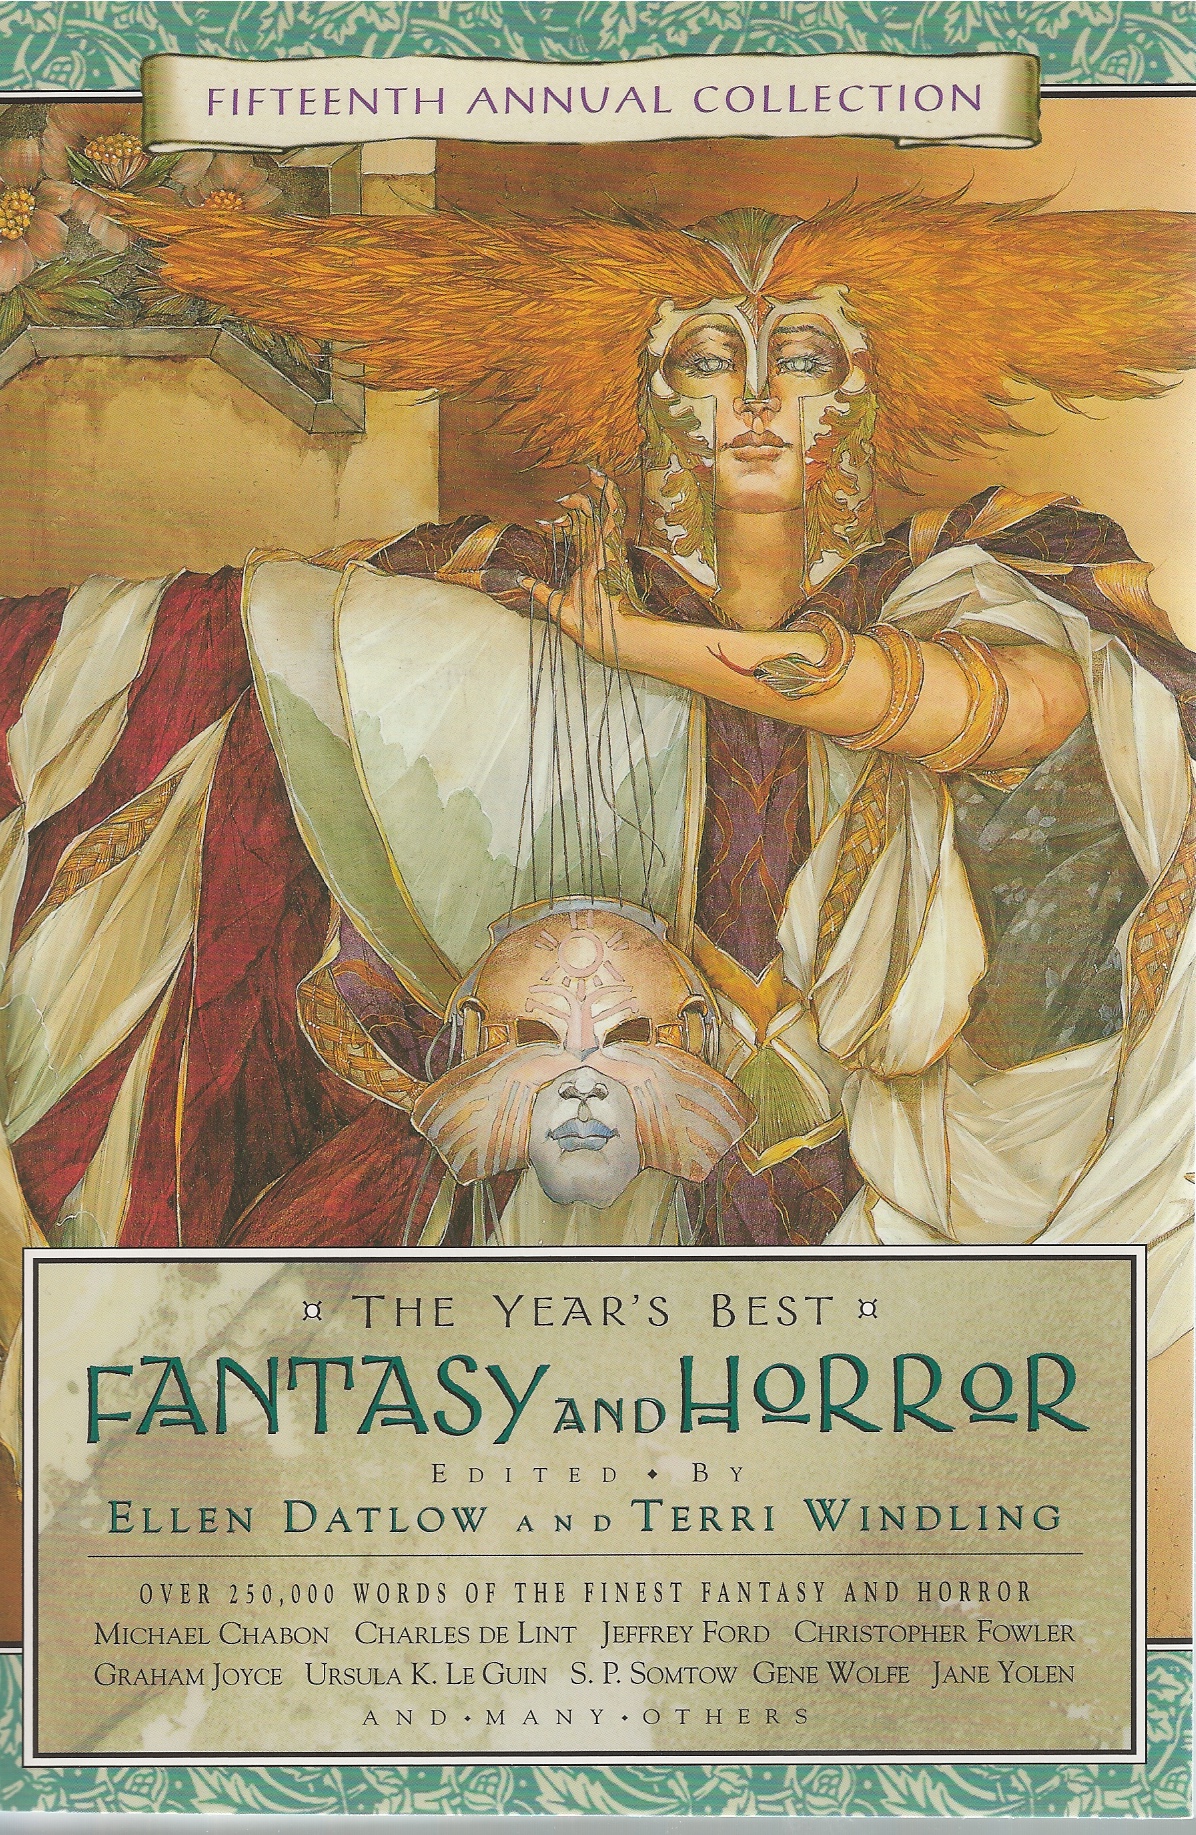 WINDLING, TERRI & ELLEN DATLOW. EDITORS - Year's Best Fantasy and Horror, the Fifteenth Annual Collection